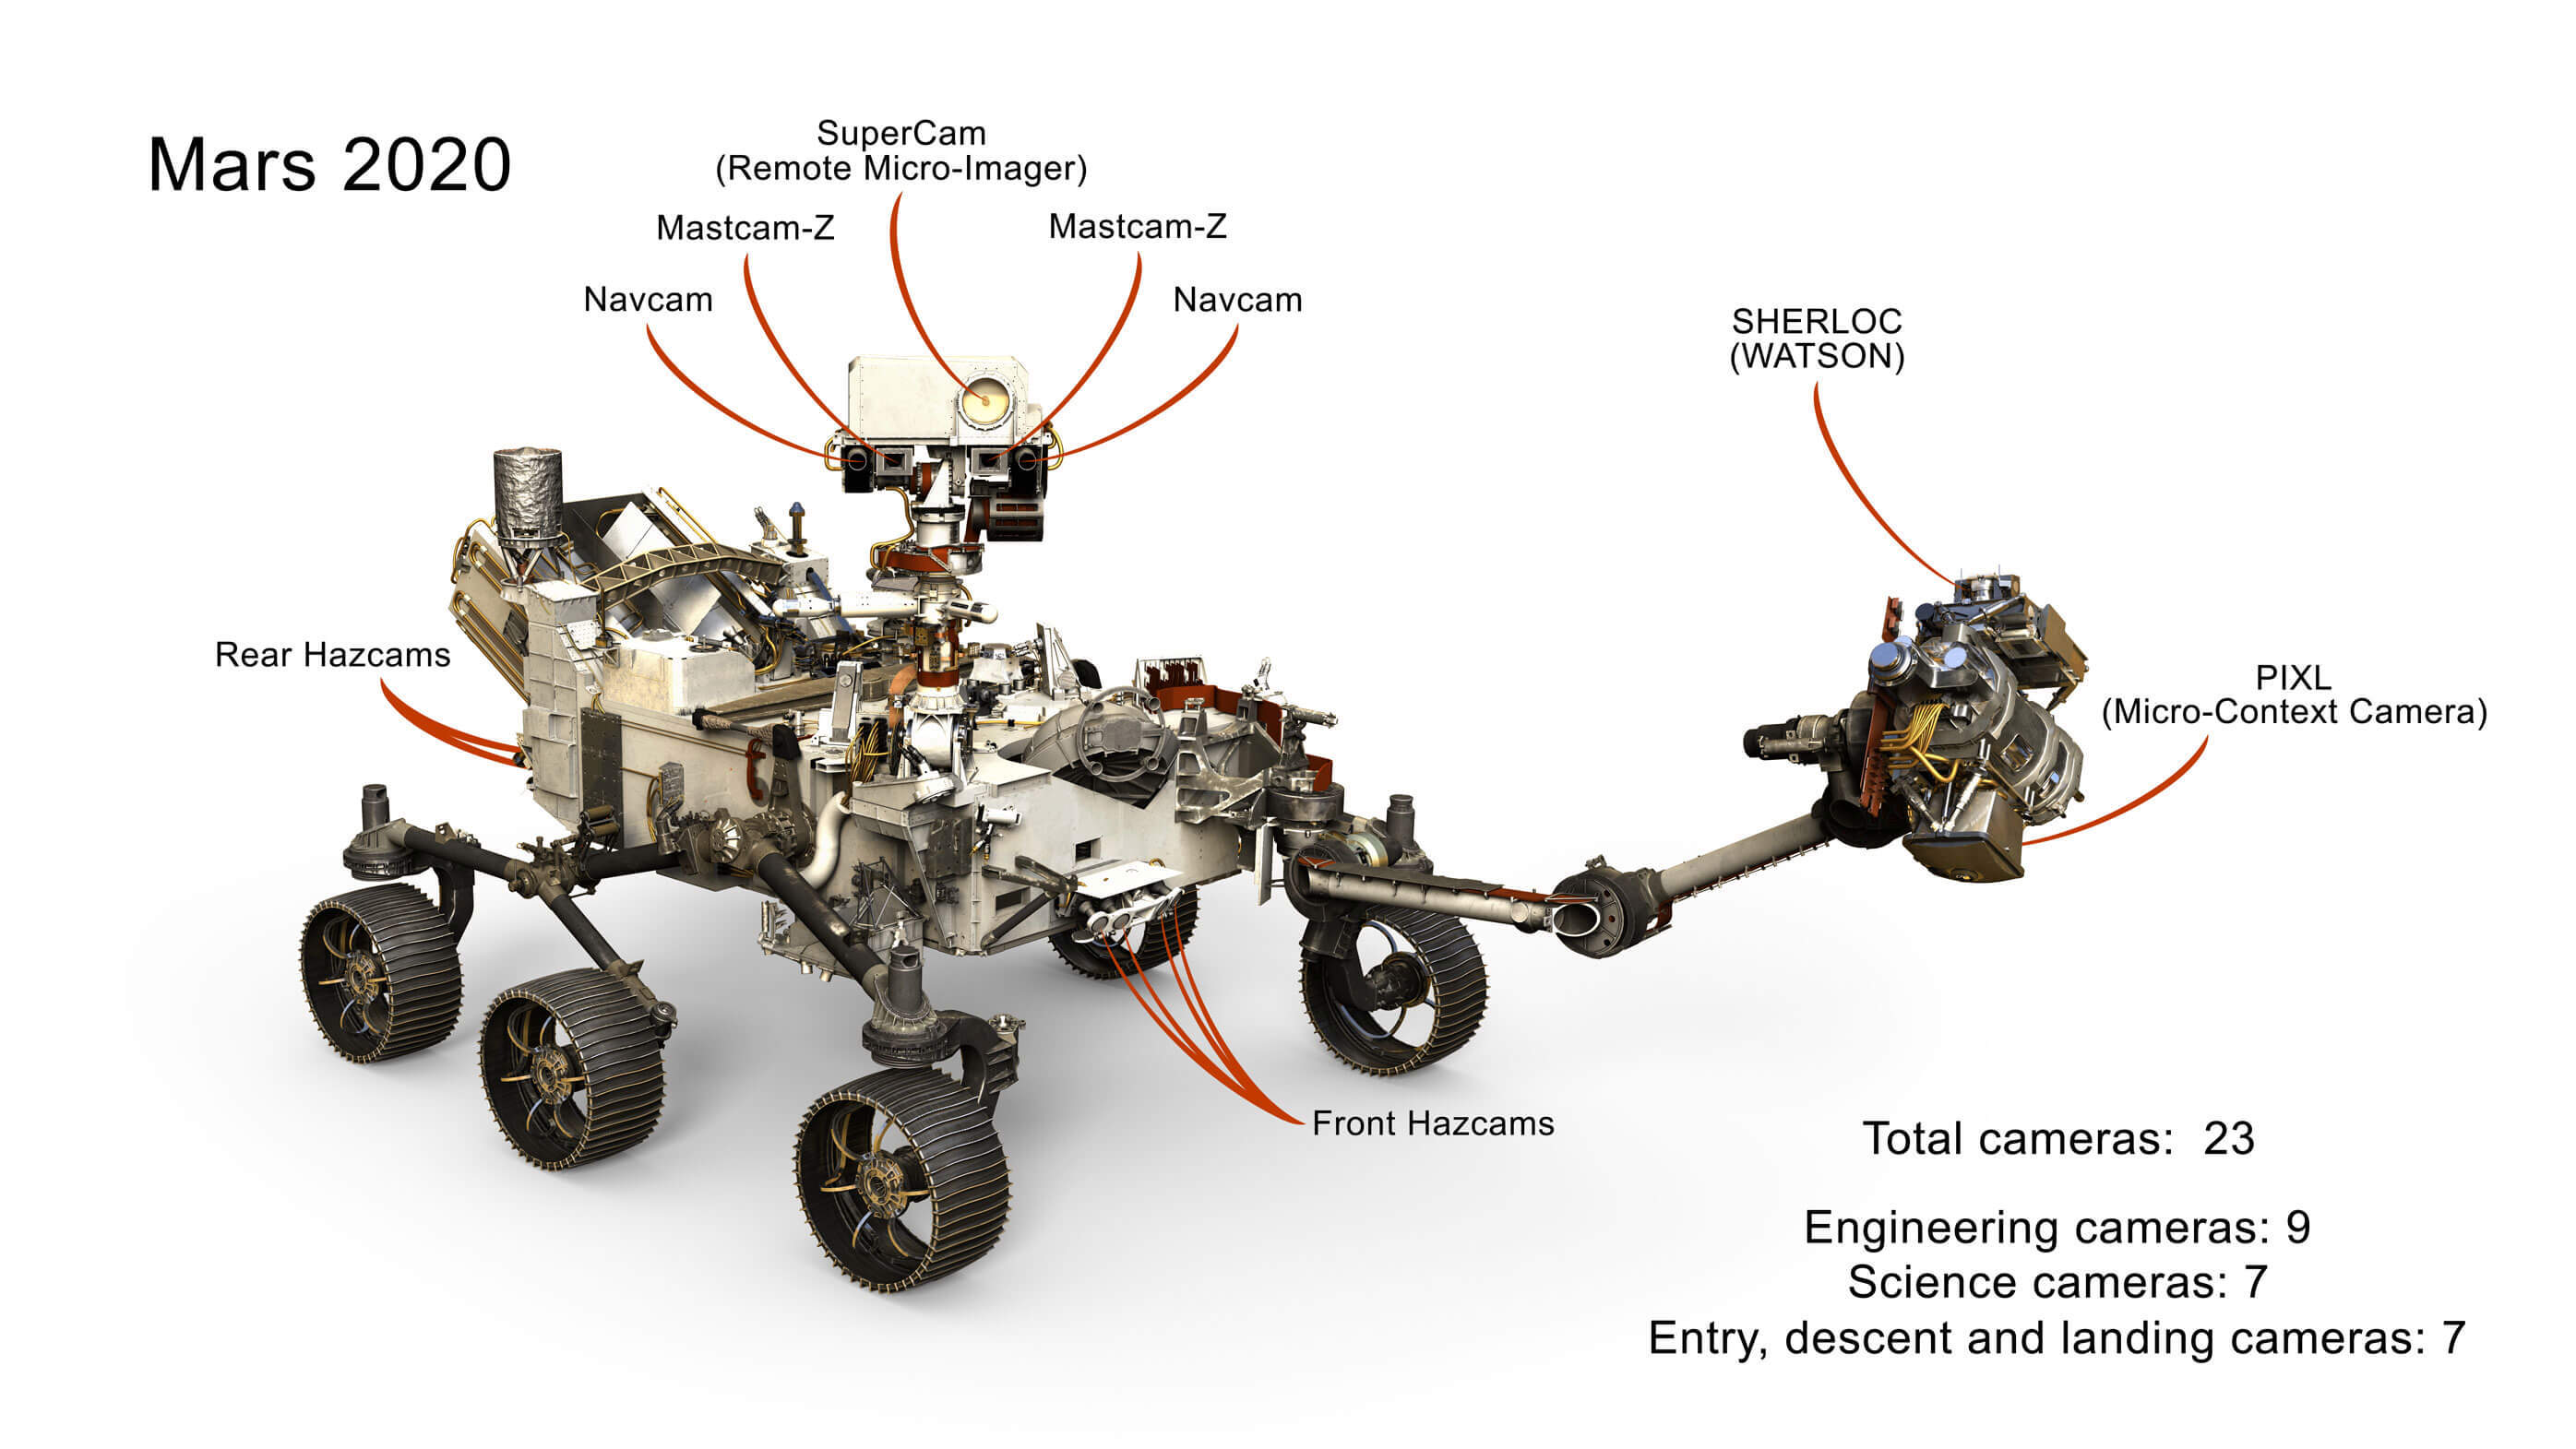 A total of 23 imaging systems allow the Perseverance rover to safely navigate and collect geological samples from the surface of Mars.